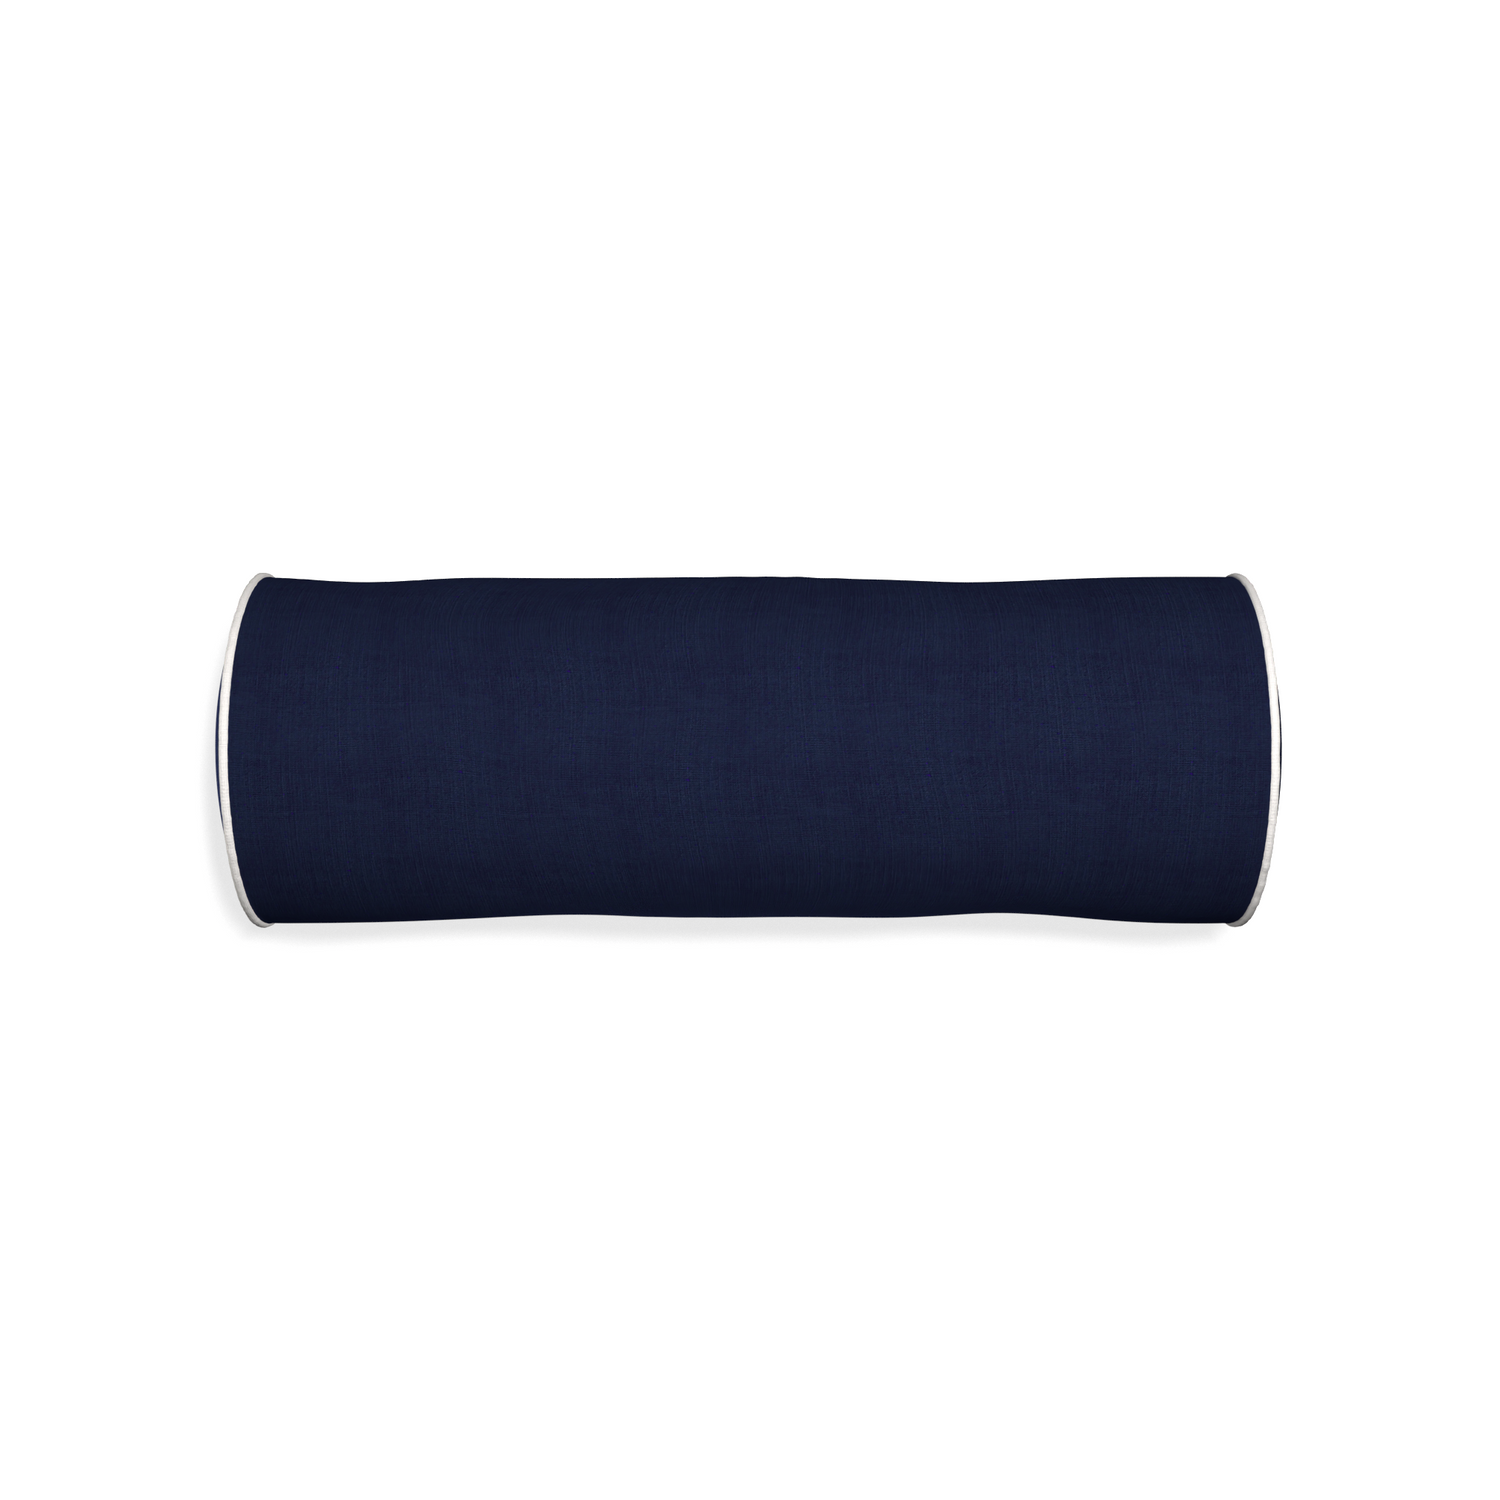 Bolster midnight custom navy bluepillow with snow piping on white background